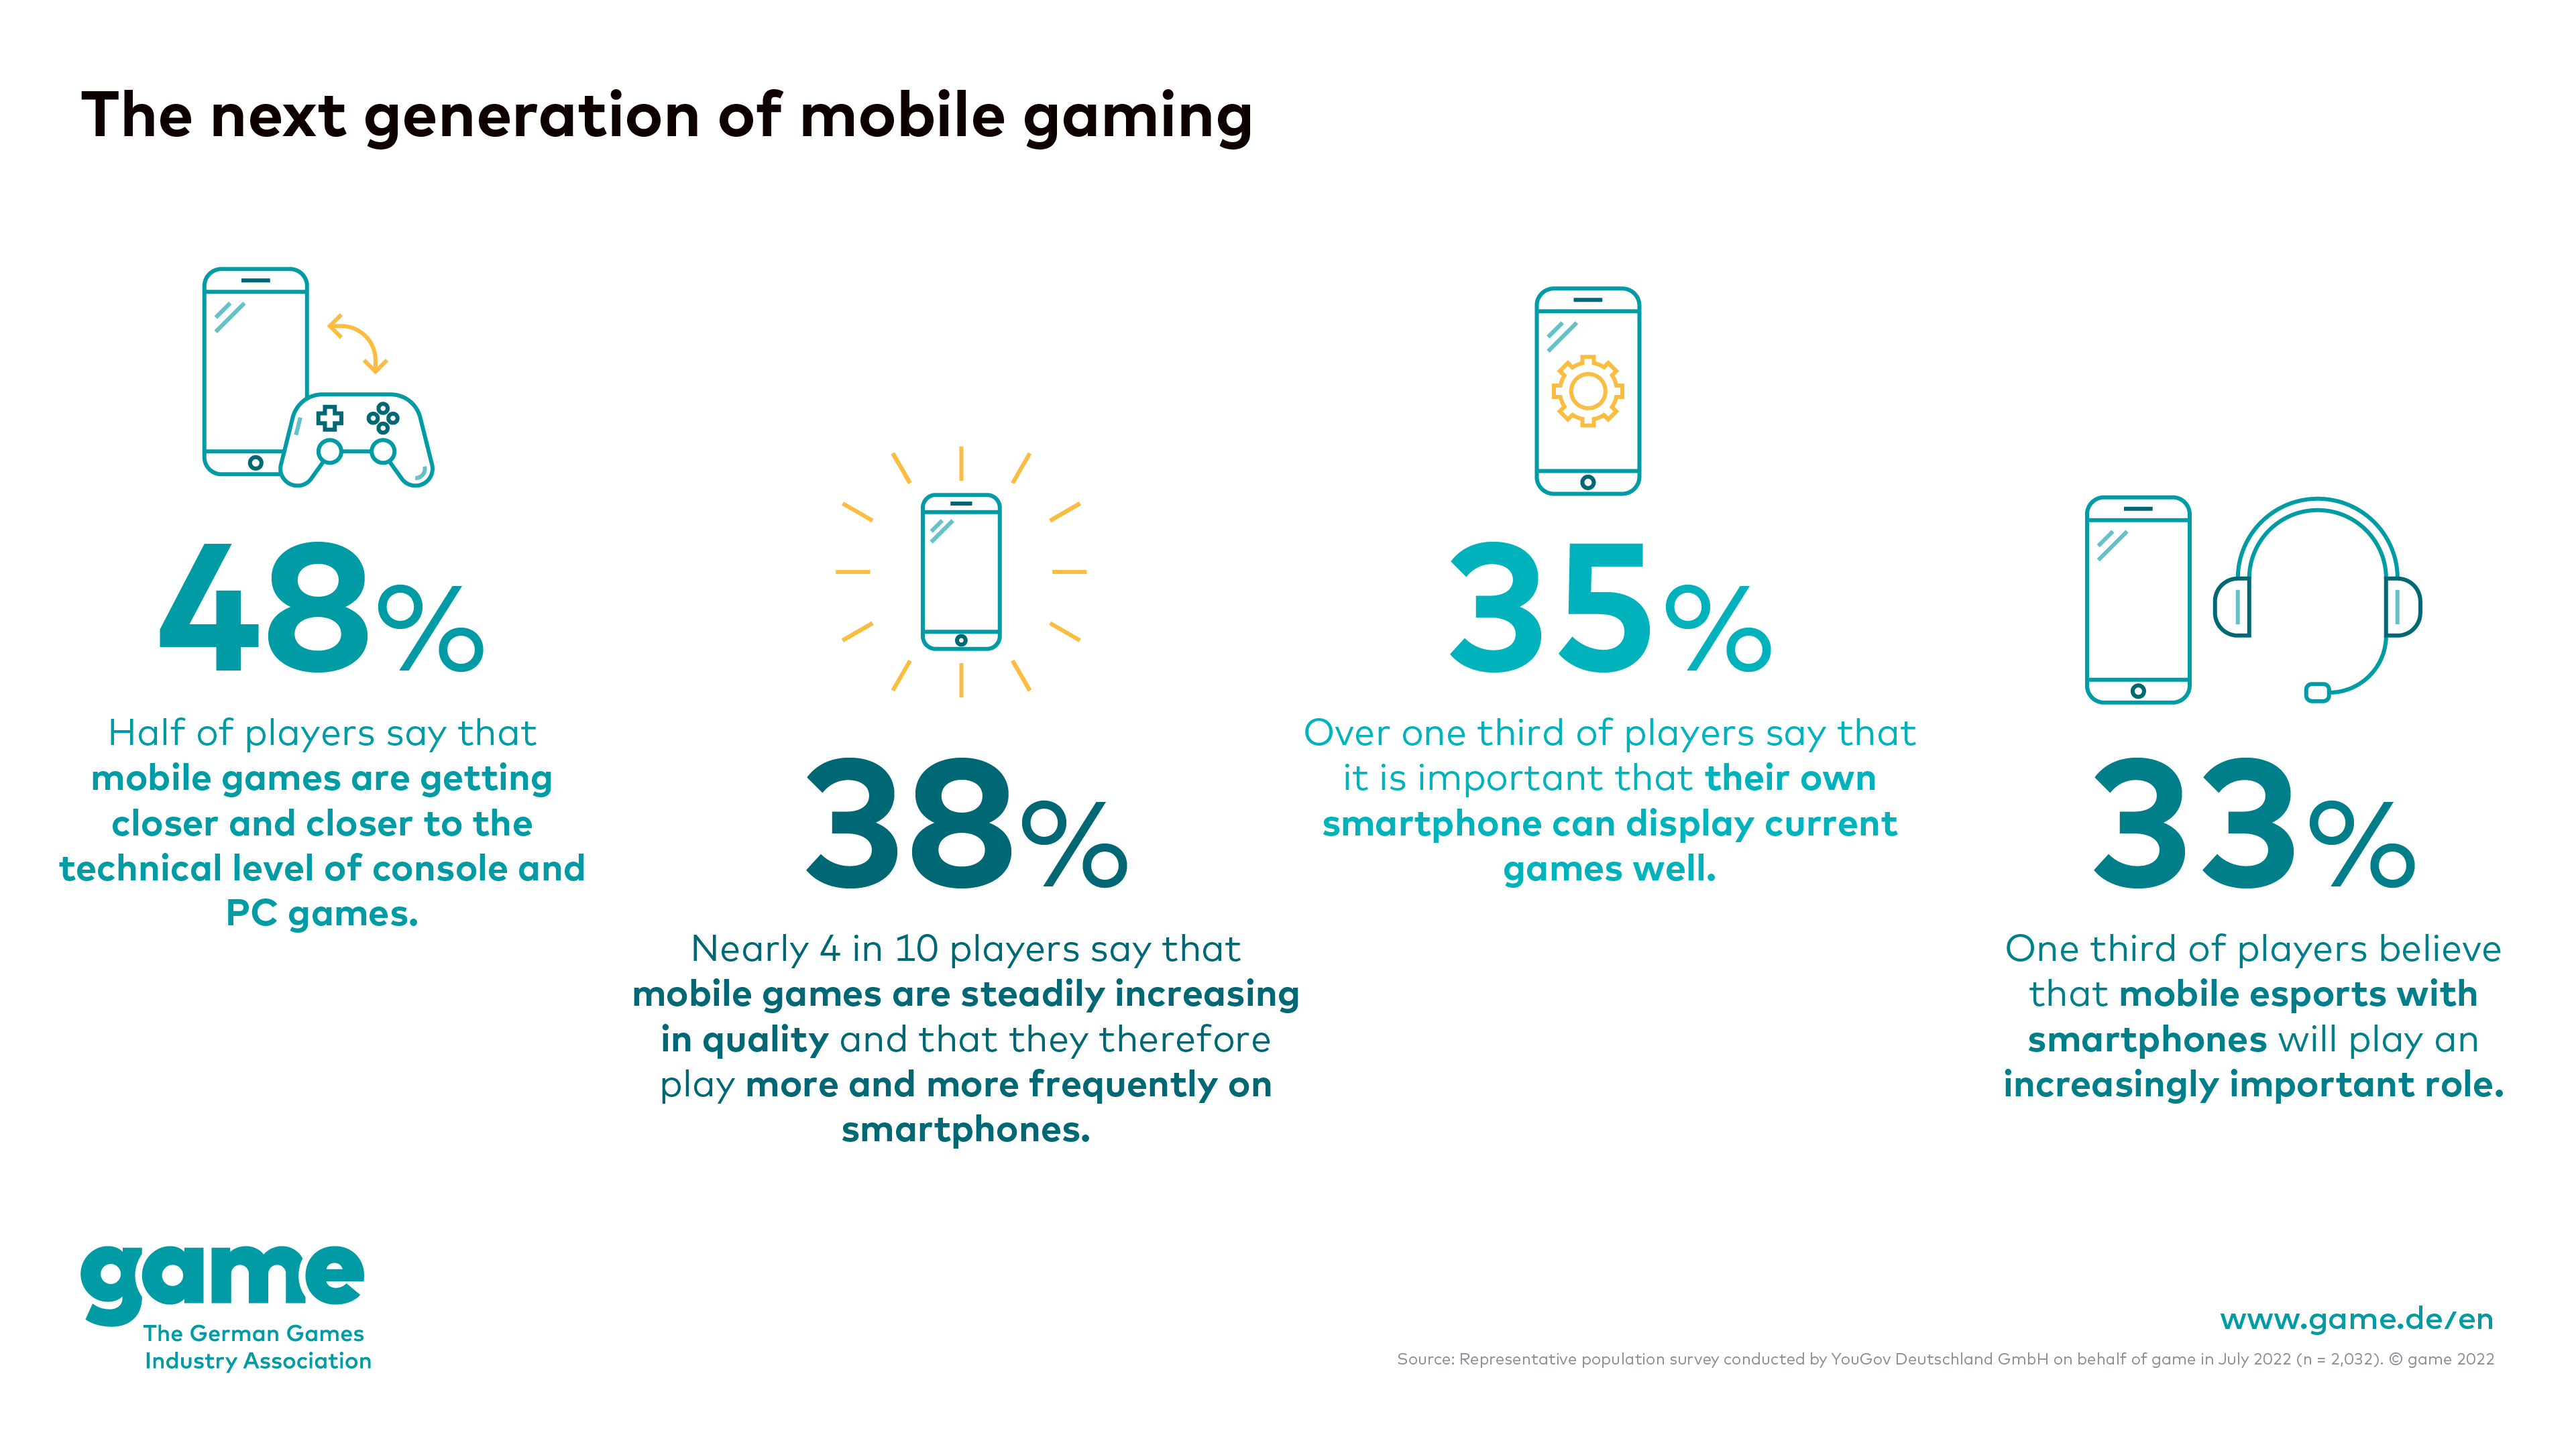 The next generation of mobile gaming